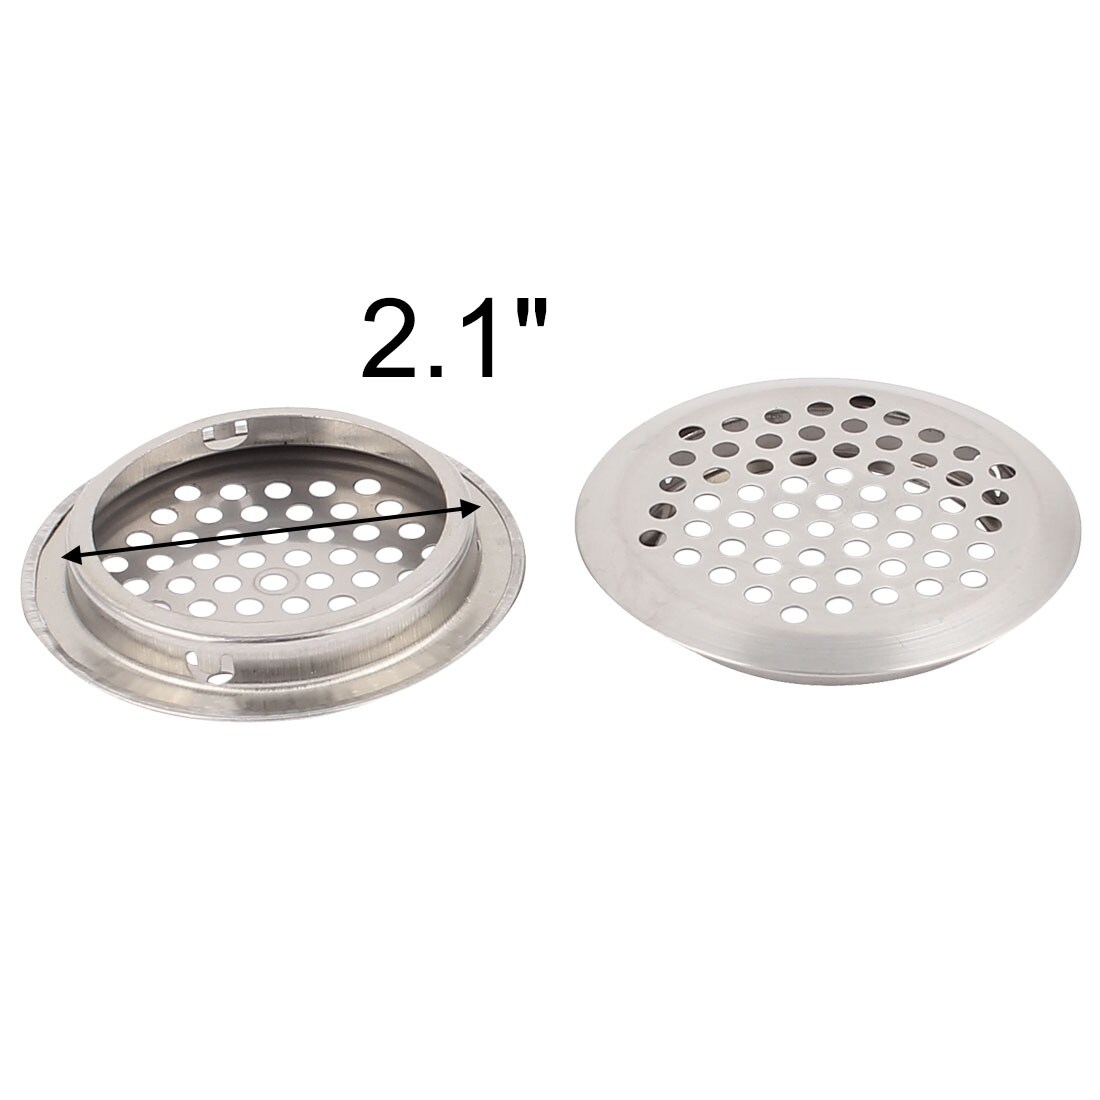 53mm Bottom Dia Mesh Panel Shoes Cupboard Cabinet Air Vent Louver Cover 5pcs 